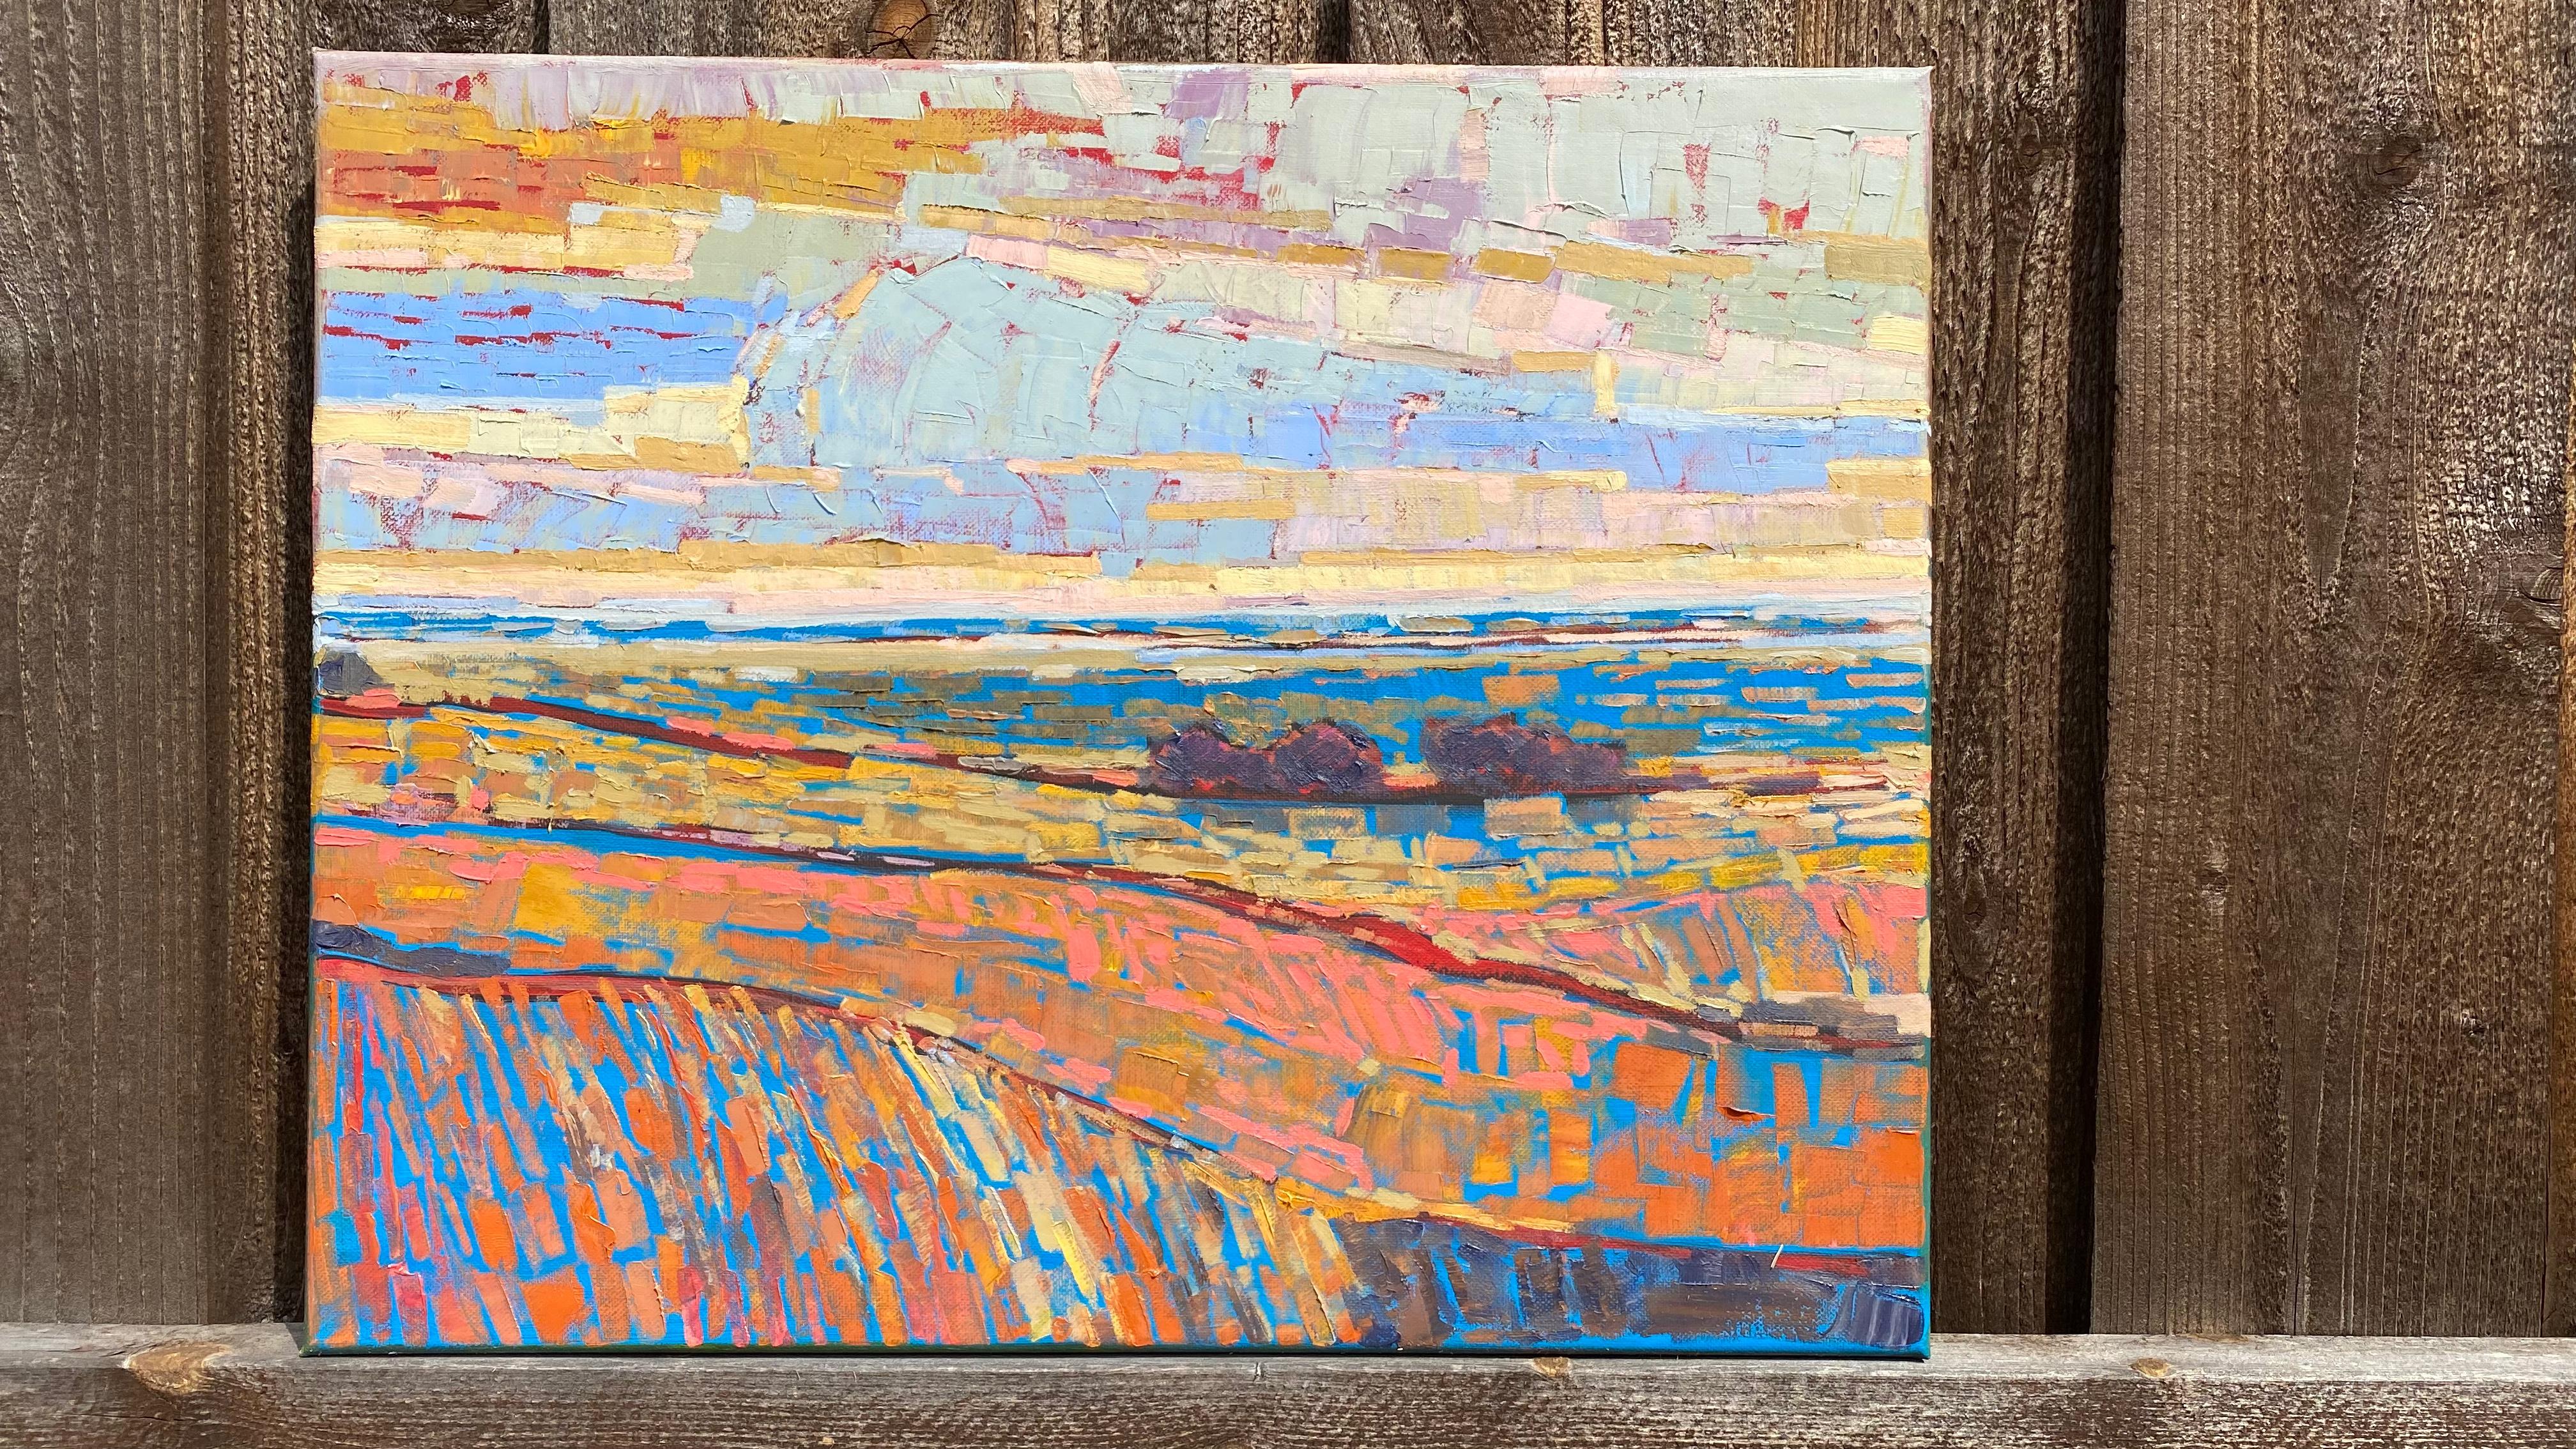 <p>Artist Comments<br>Artist Srinivas Kathoju takes inspiration from nature's vast open fields. Rolling mountains and broad horizons connect to endless skies. A bright blue hue peeks through broken colors of brown, yellow, and orange. Srinivas'